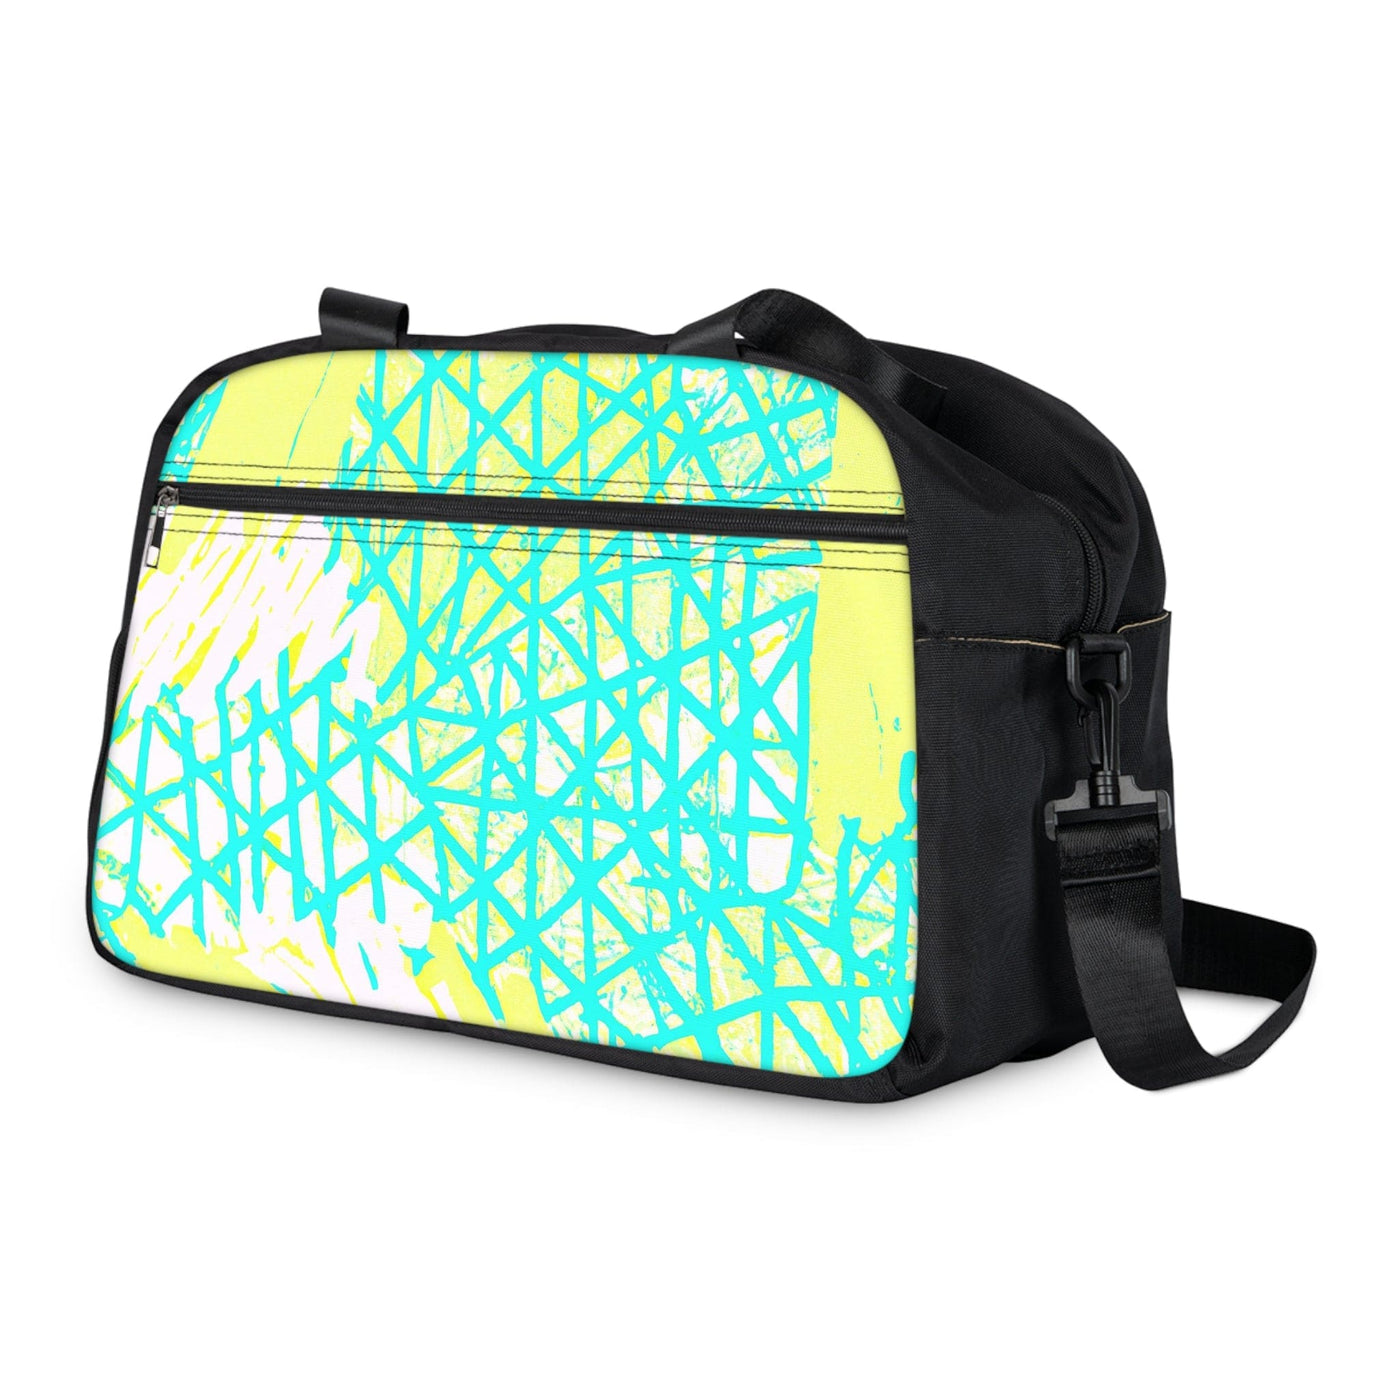 Travel Fitness Bag Cyan Blue Lime Green And White Pattern - Bags